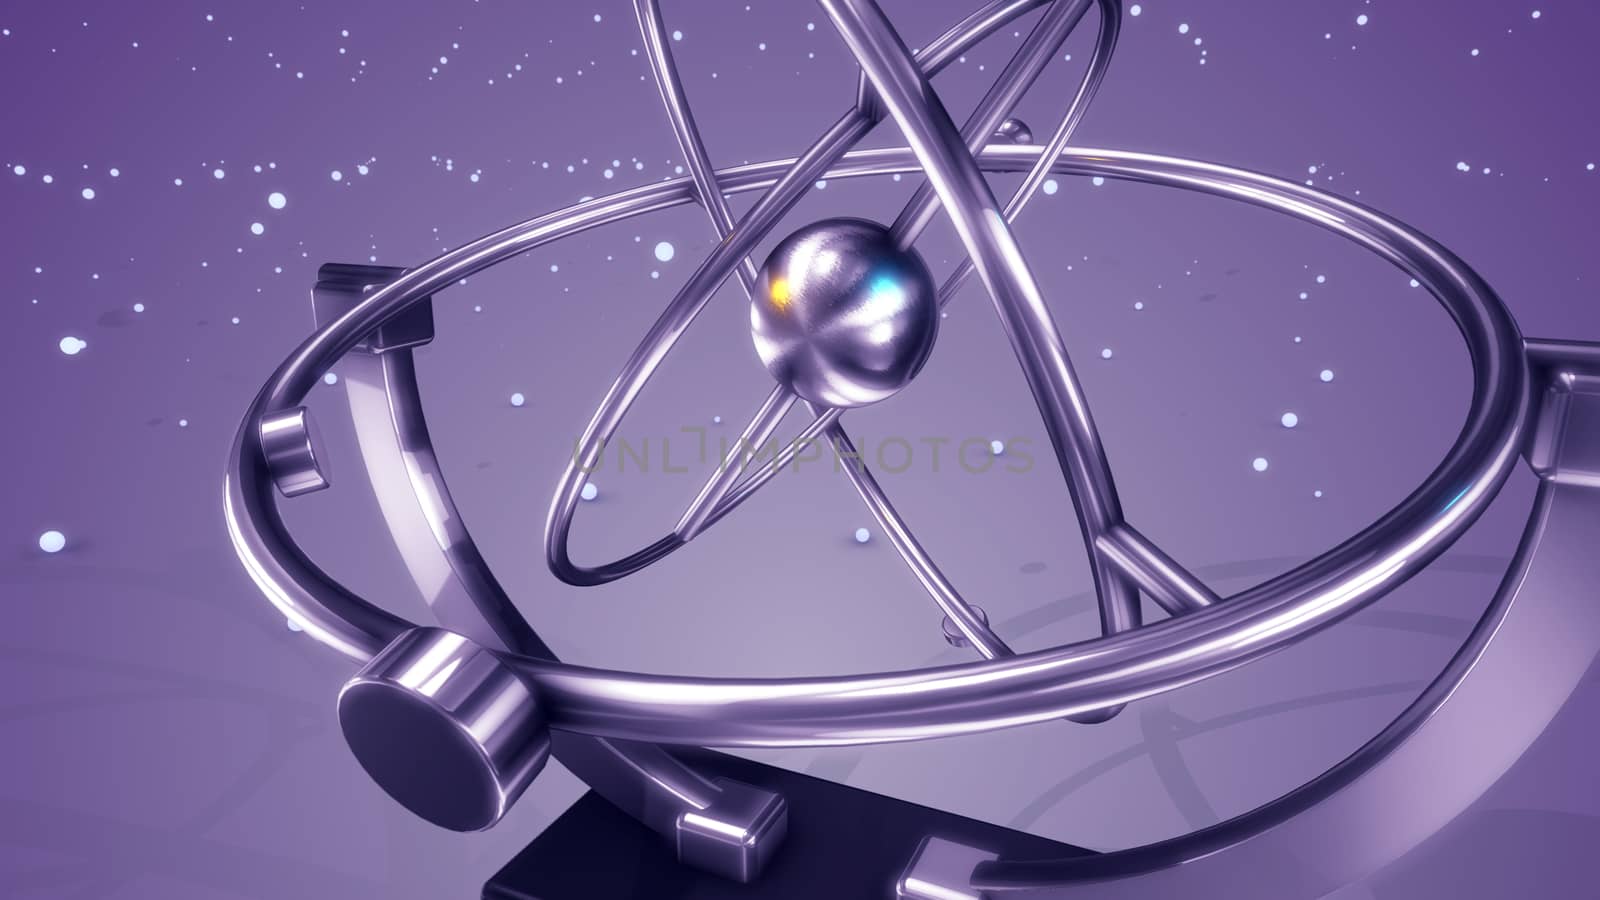 An artistic 3d illustration of a silver pendulum swaying in three spheres back and forth with glittering spots flying in the light violet background. It looks hi-tech.